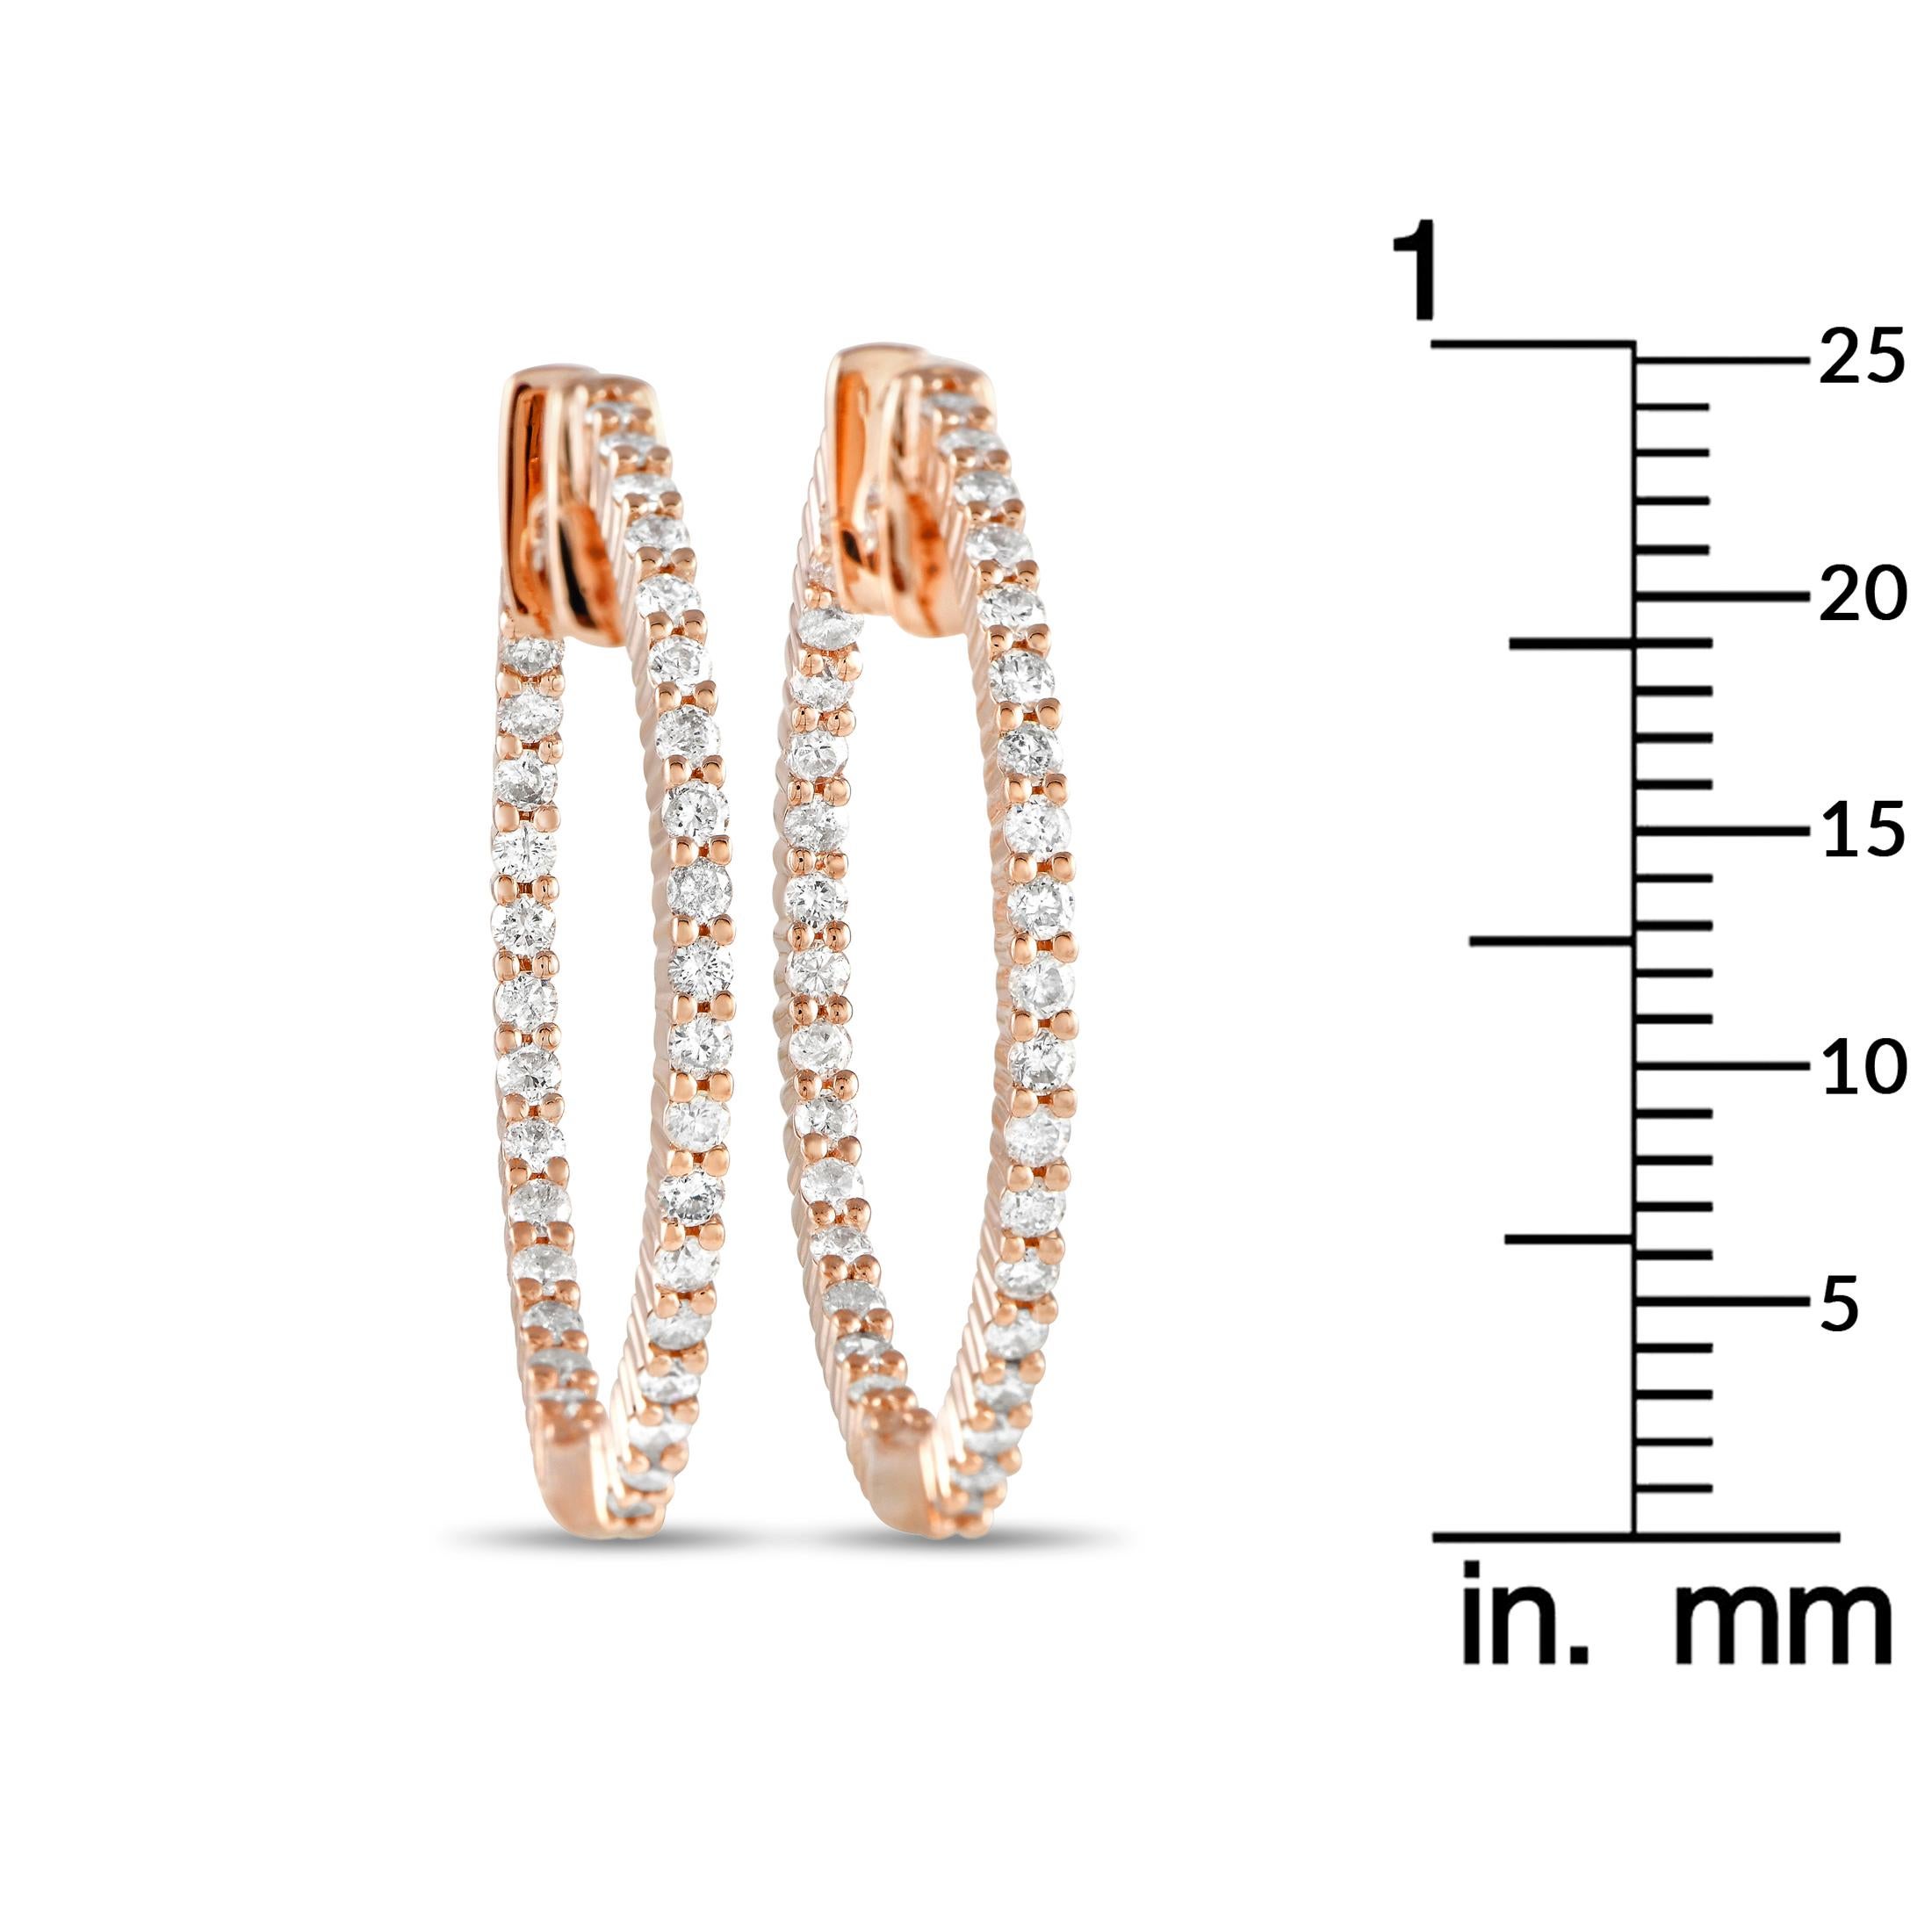 Round Cut Lb Exclusive 14k Rose Gold 1.0 Carat Diamonds Inside-Out Hoop Earrings For Sale